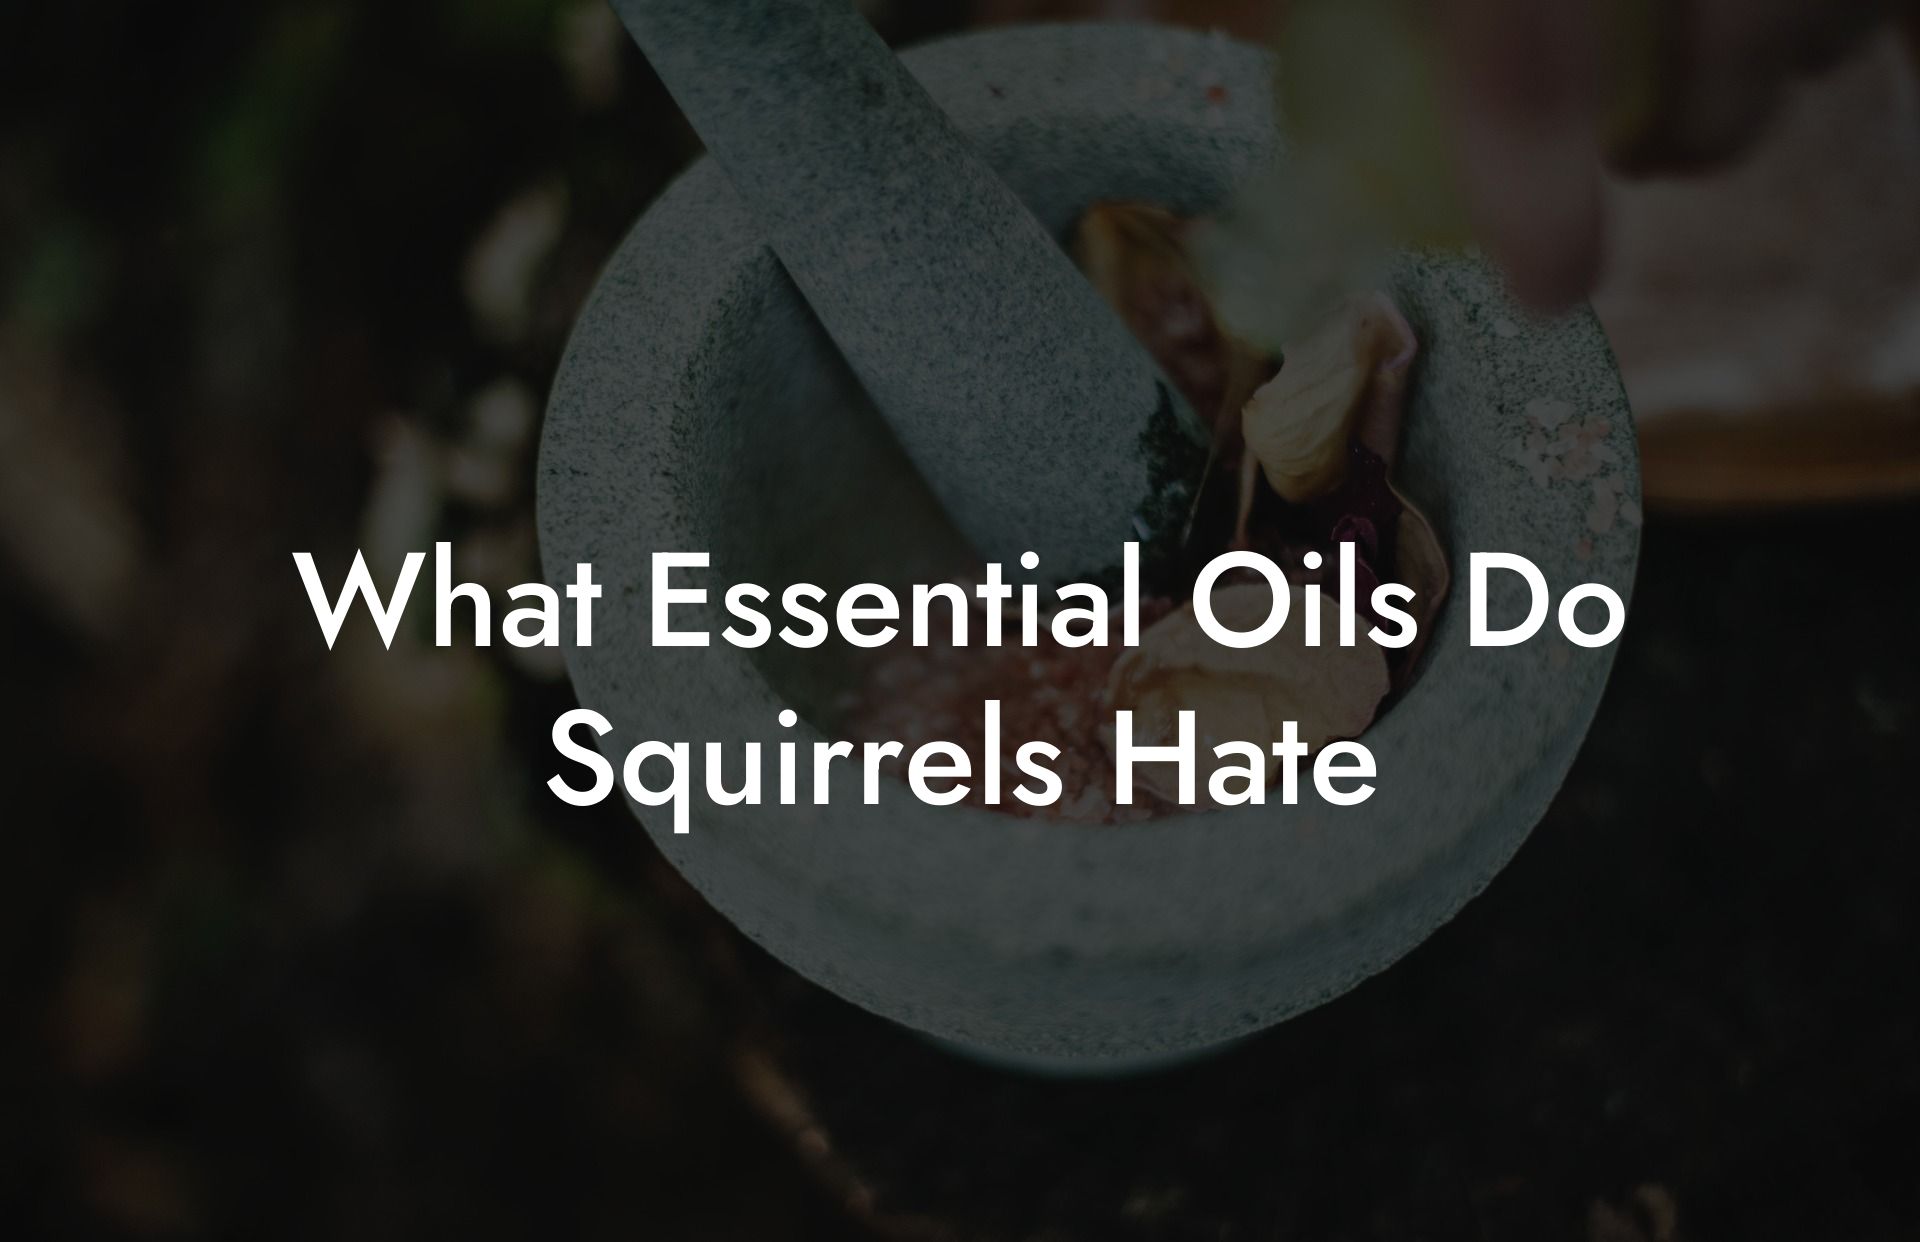 What Essential Oils Do Squirrels Hate